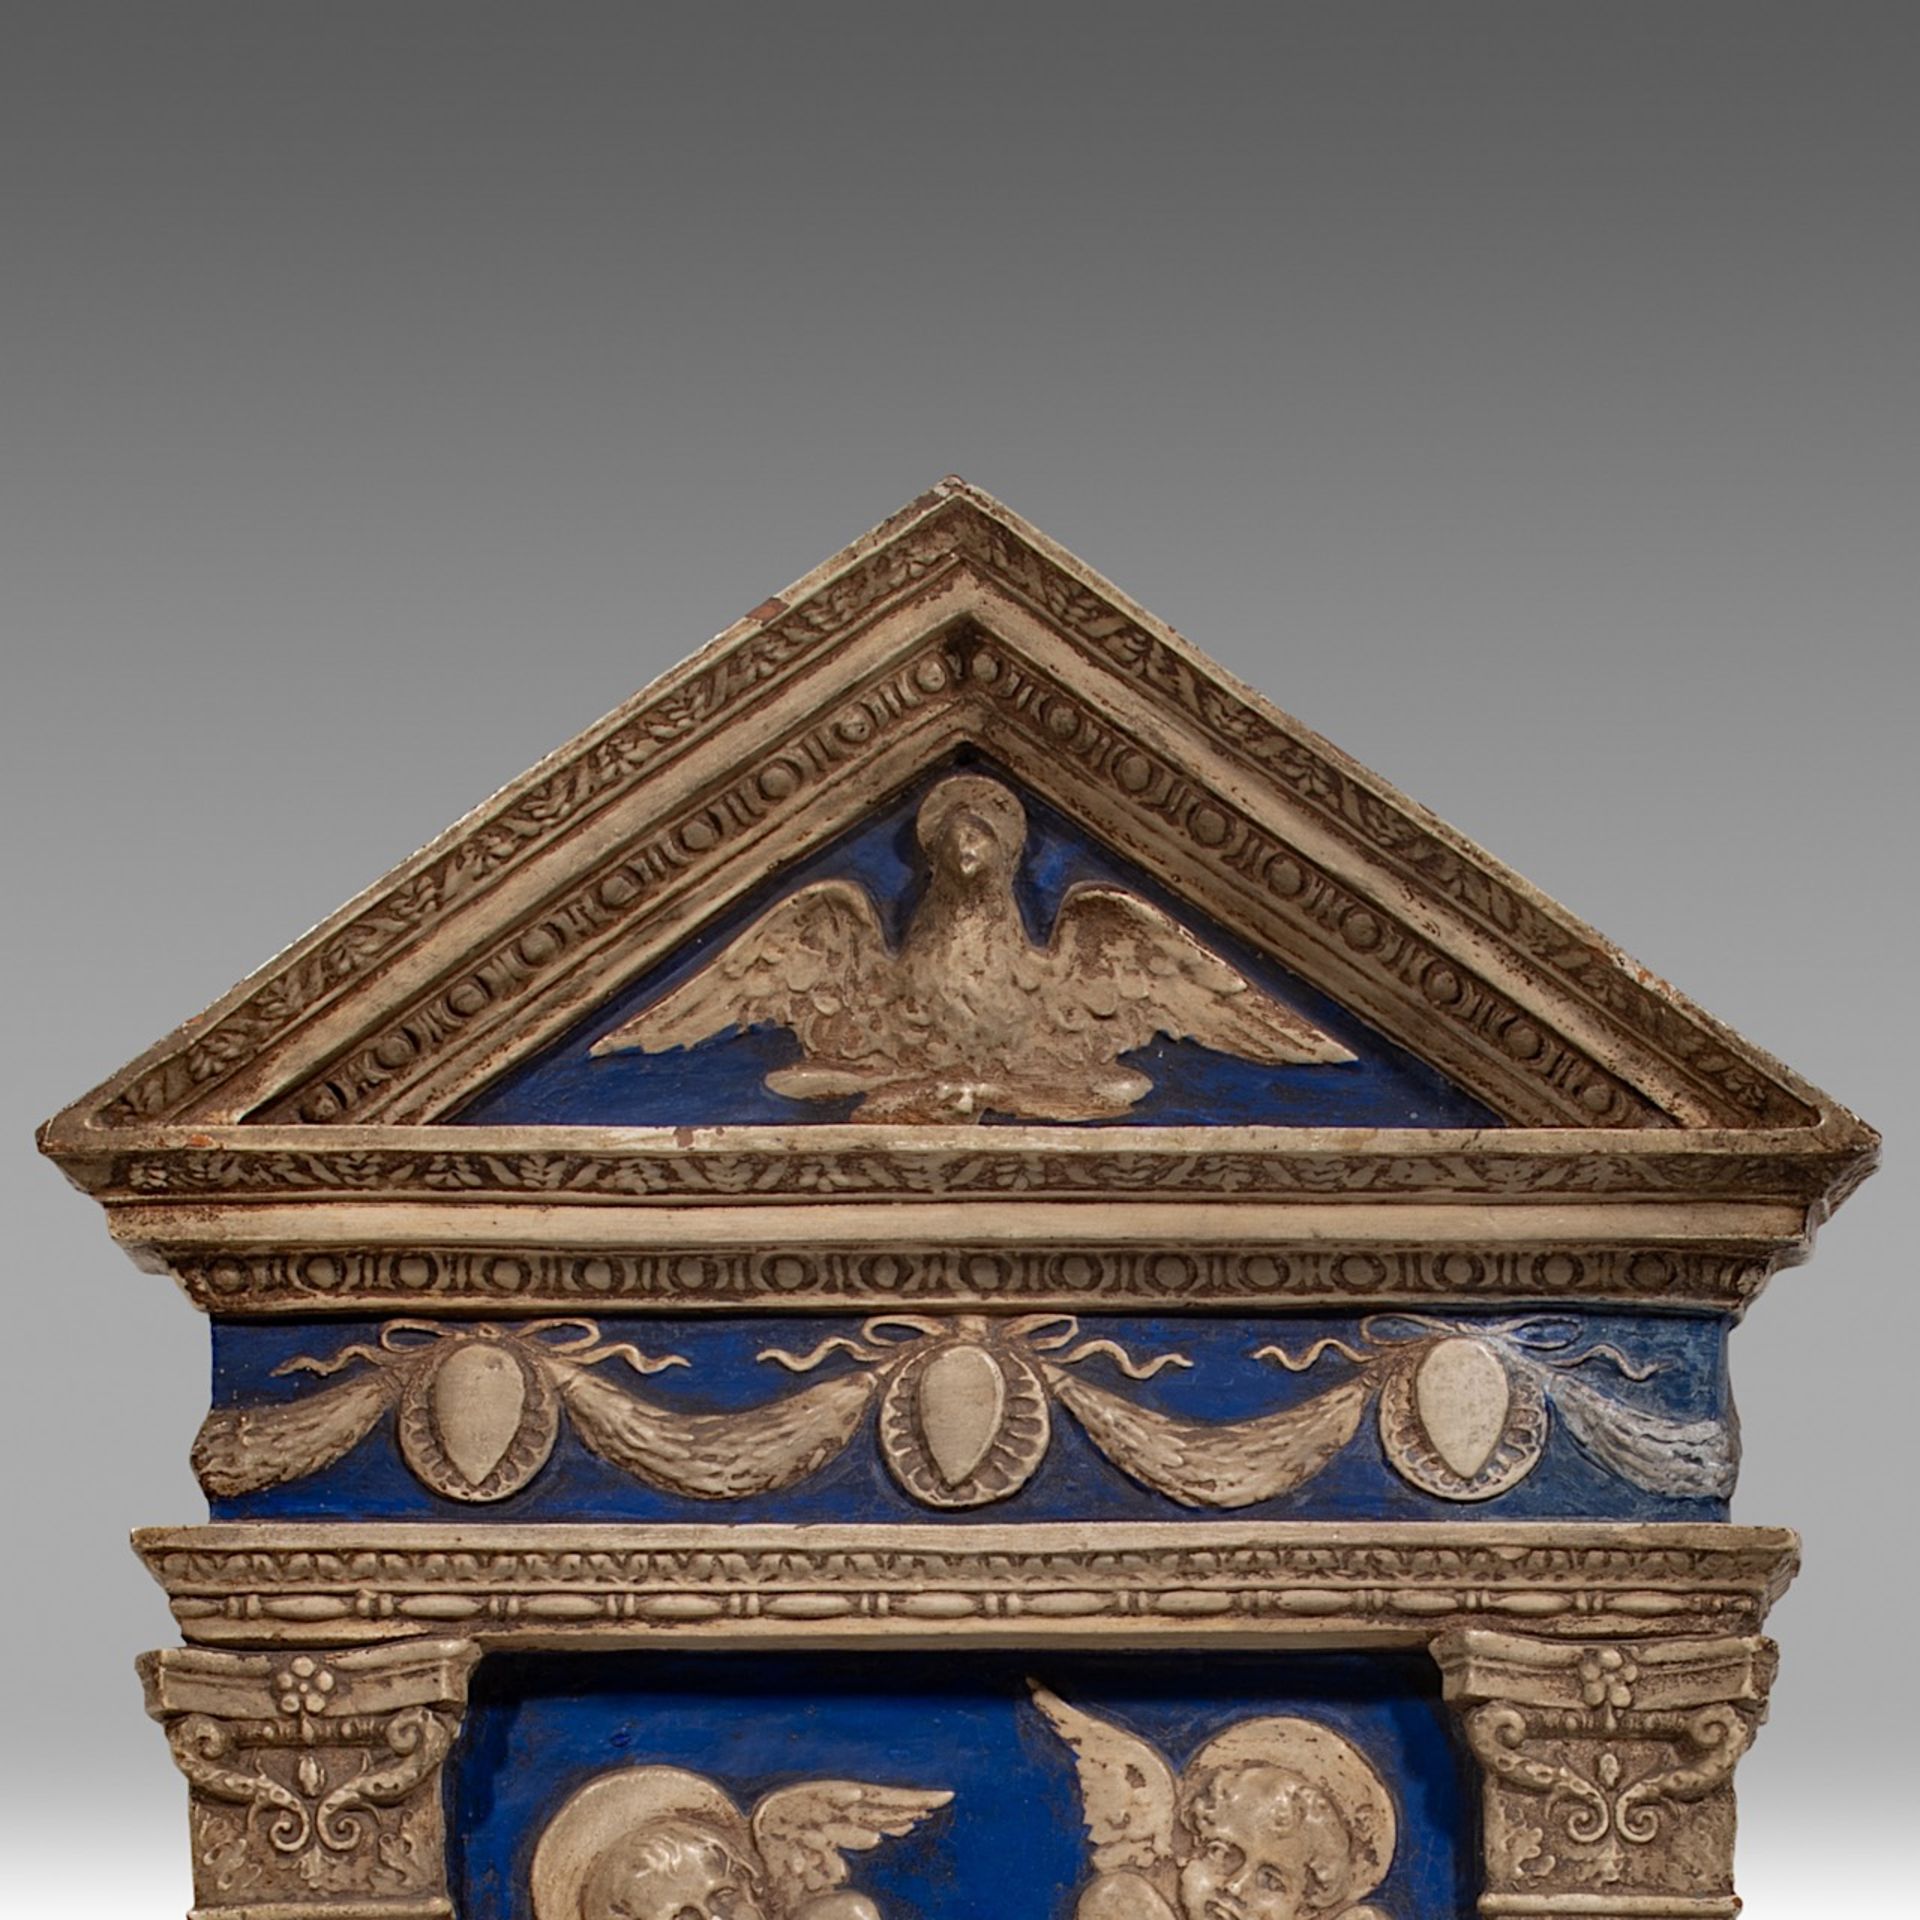 A blue and white glazed terracotta relief of the Virgin and Child in the Della Robbia manner or a fo - Image 6 of 6